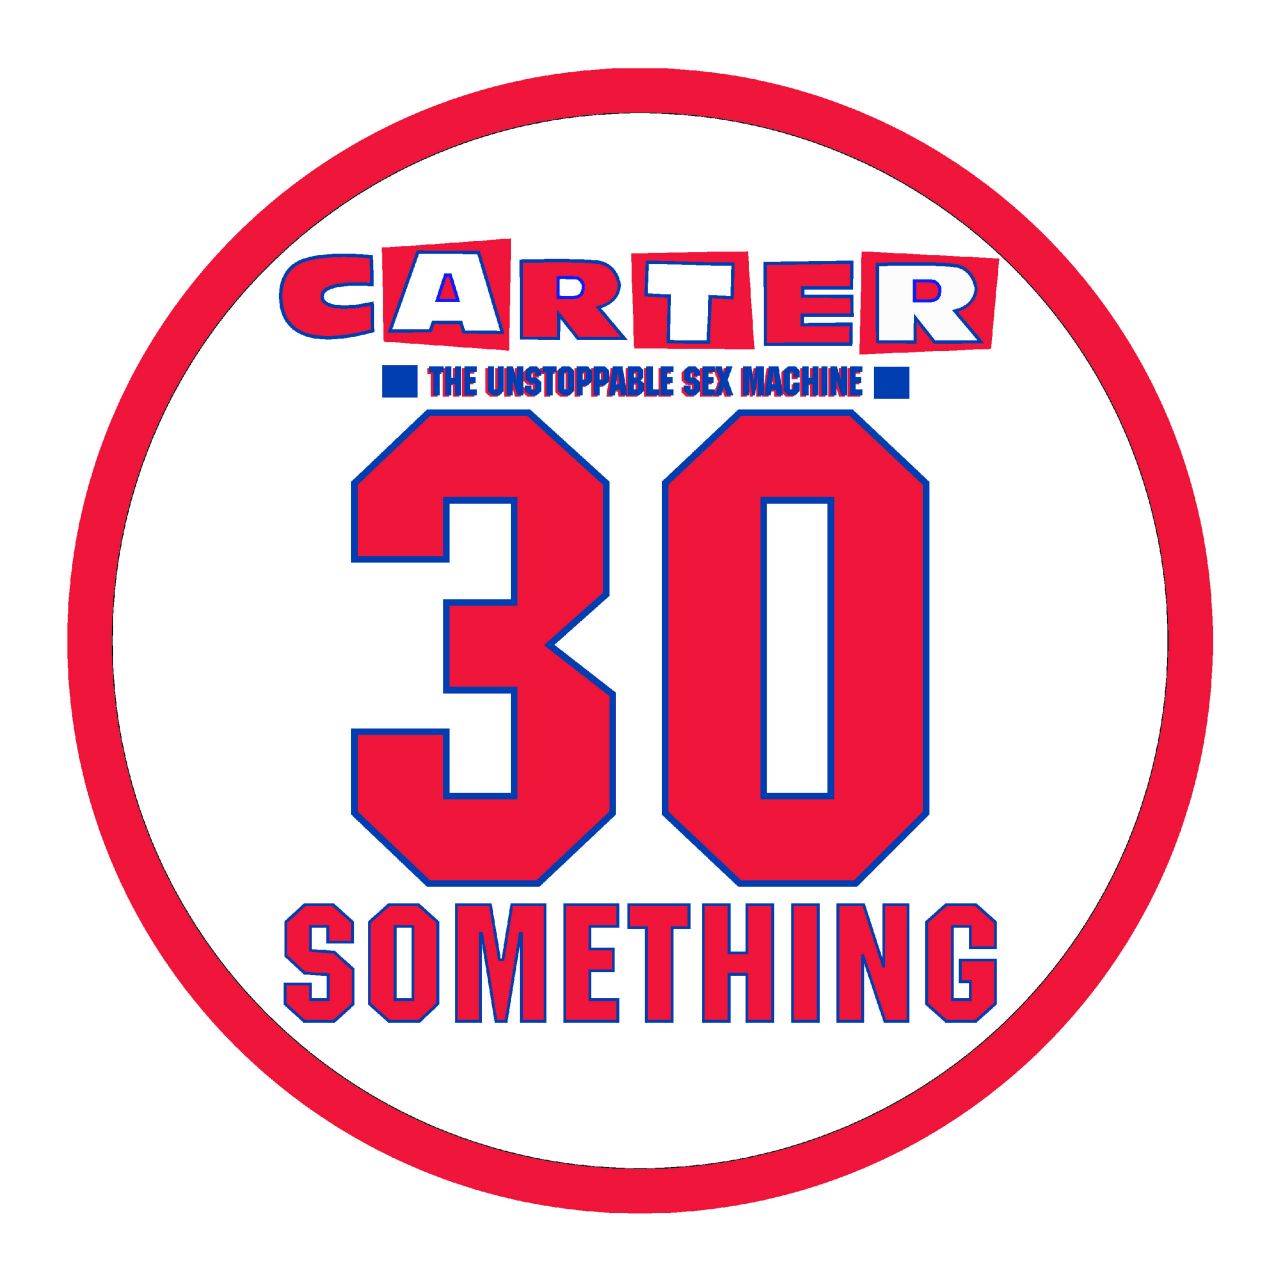 Carter The Unstoppable Sex Machine - 30 Something - LP